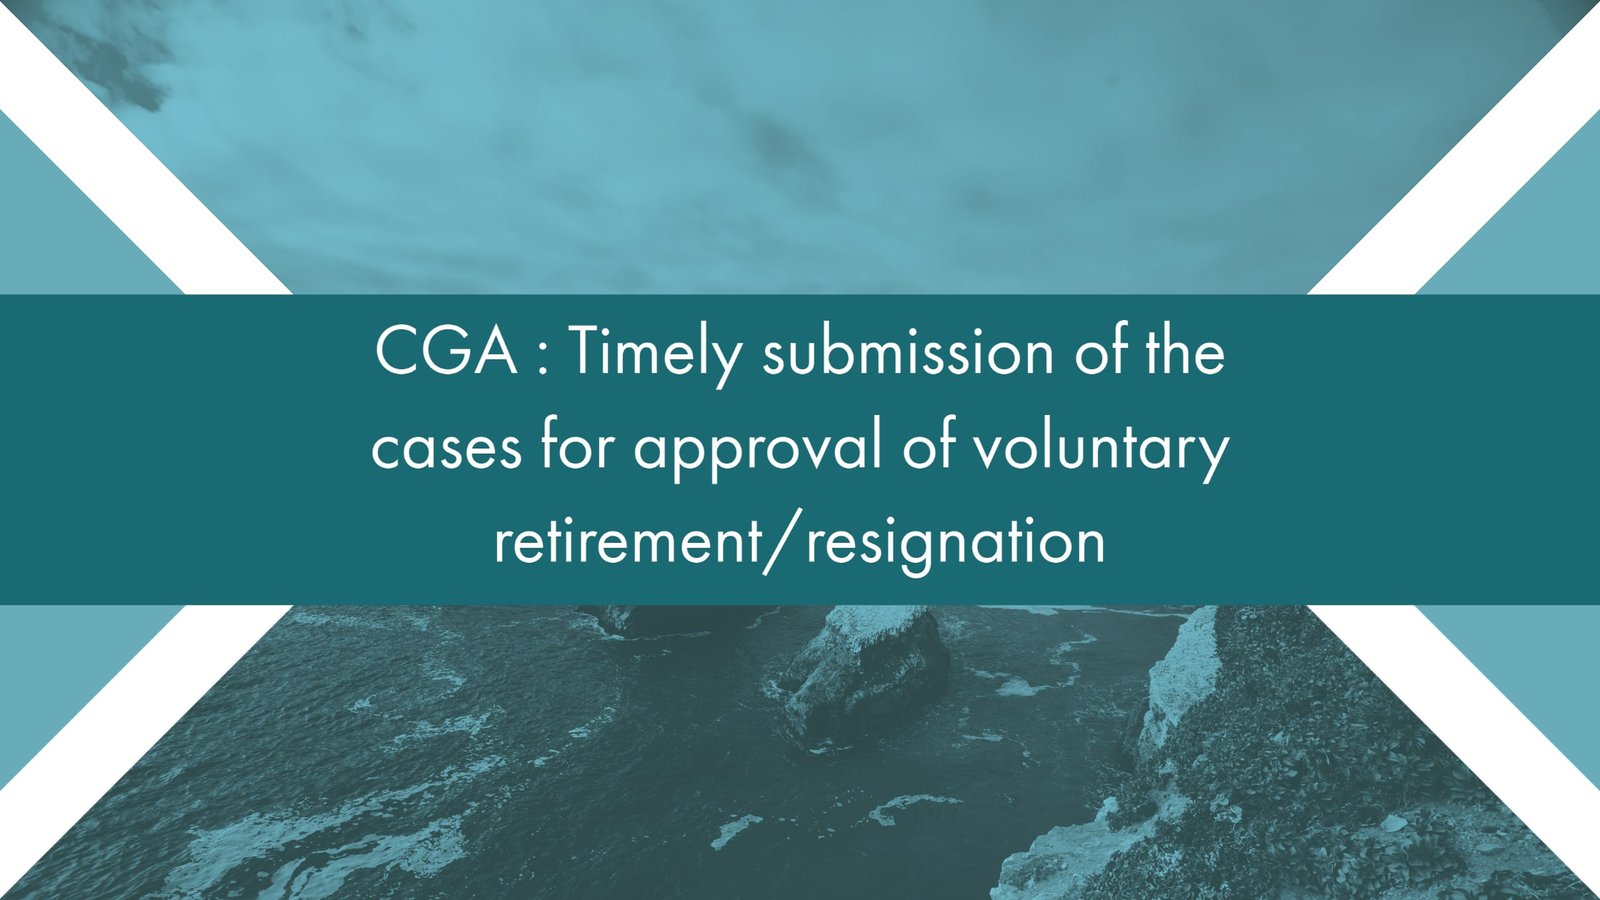 CGA - Timely submission of the cases for approval of voluntary retirement resignation